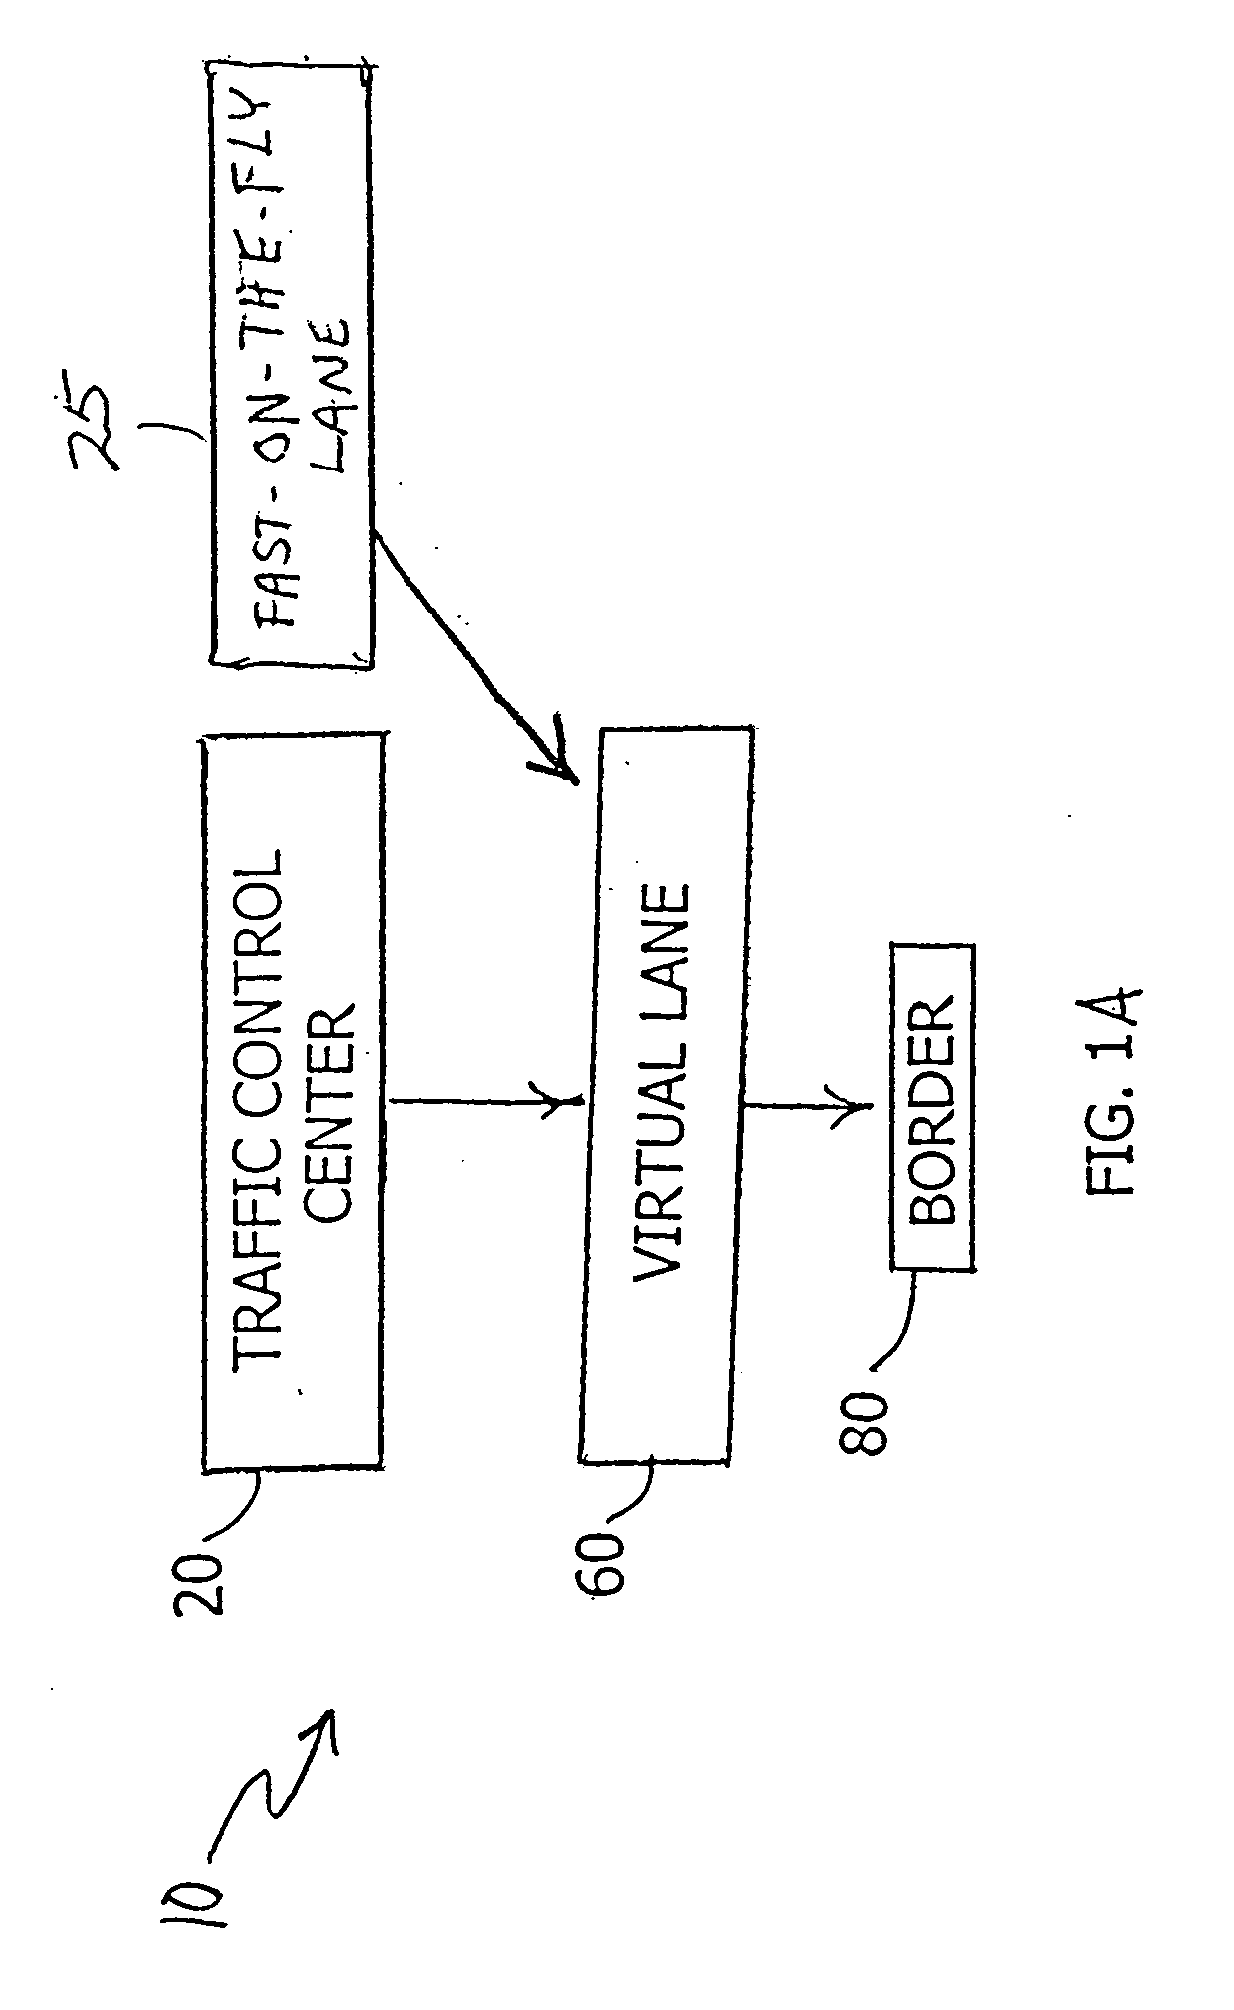 Traffic control system and method for use in international border zones